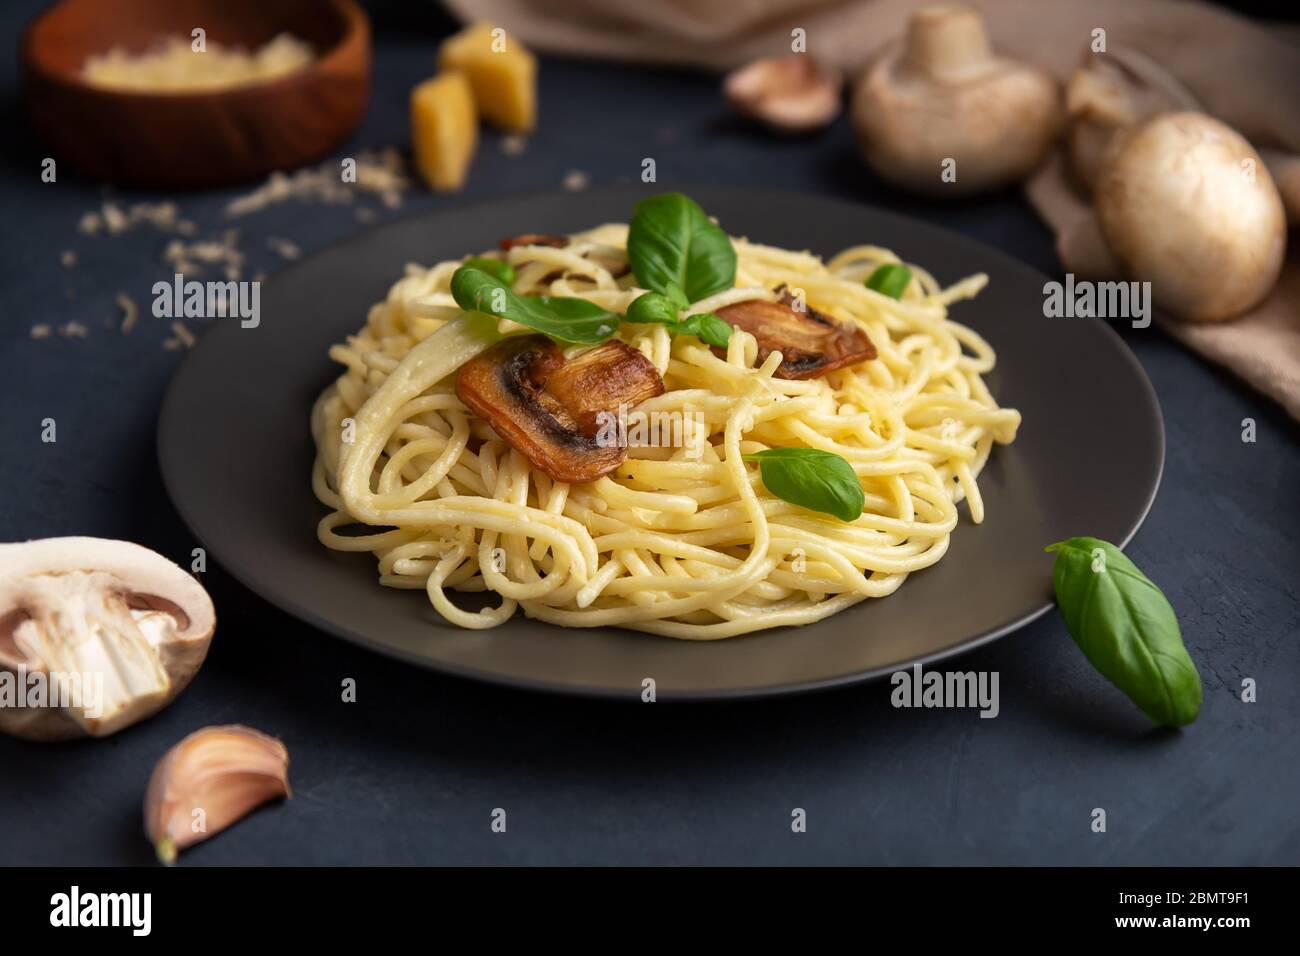 Italian pasta with mushrooms and cheese on a dark background. Close-up Stock Photo